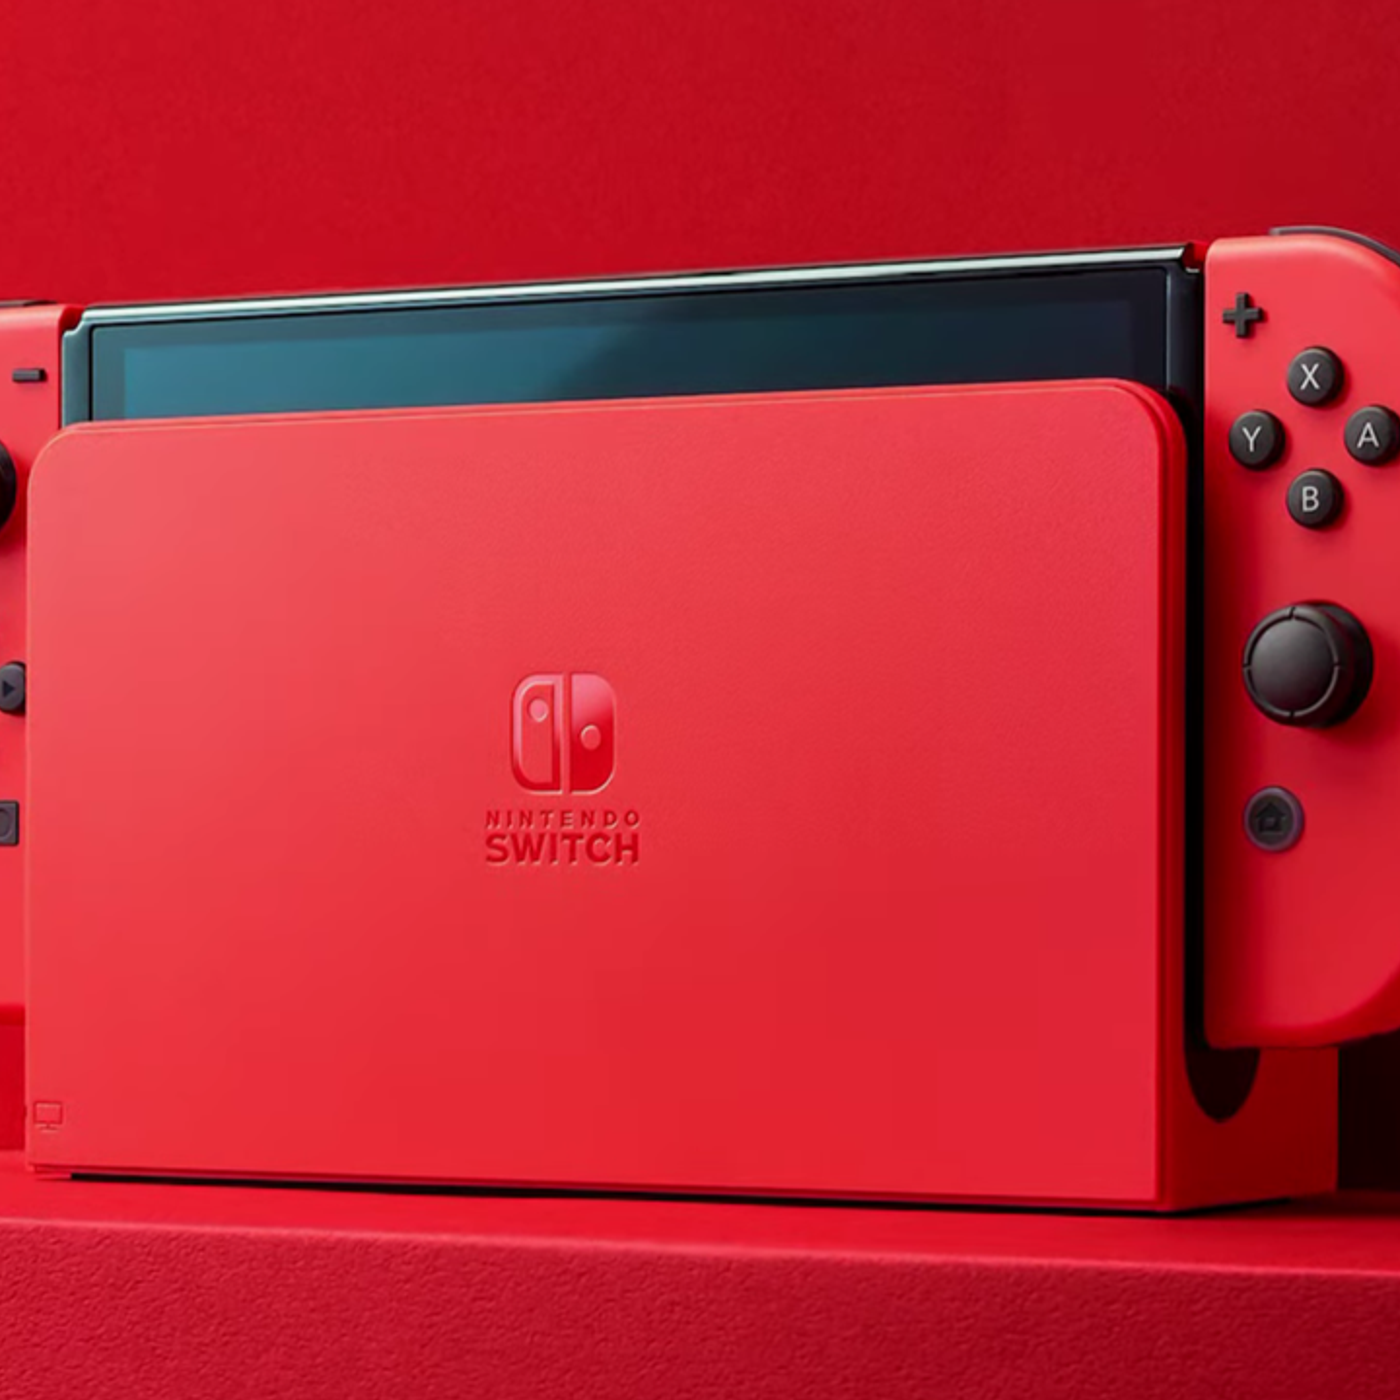 S19 Ep1324: Rumor: Switch 2 ‘will have an 8-inch LCD screen’